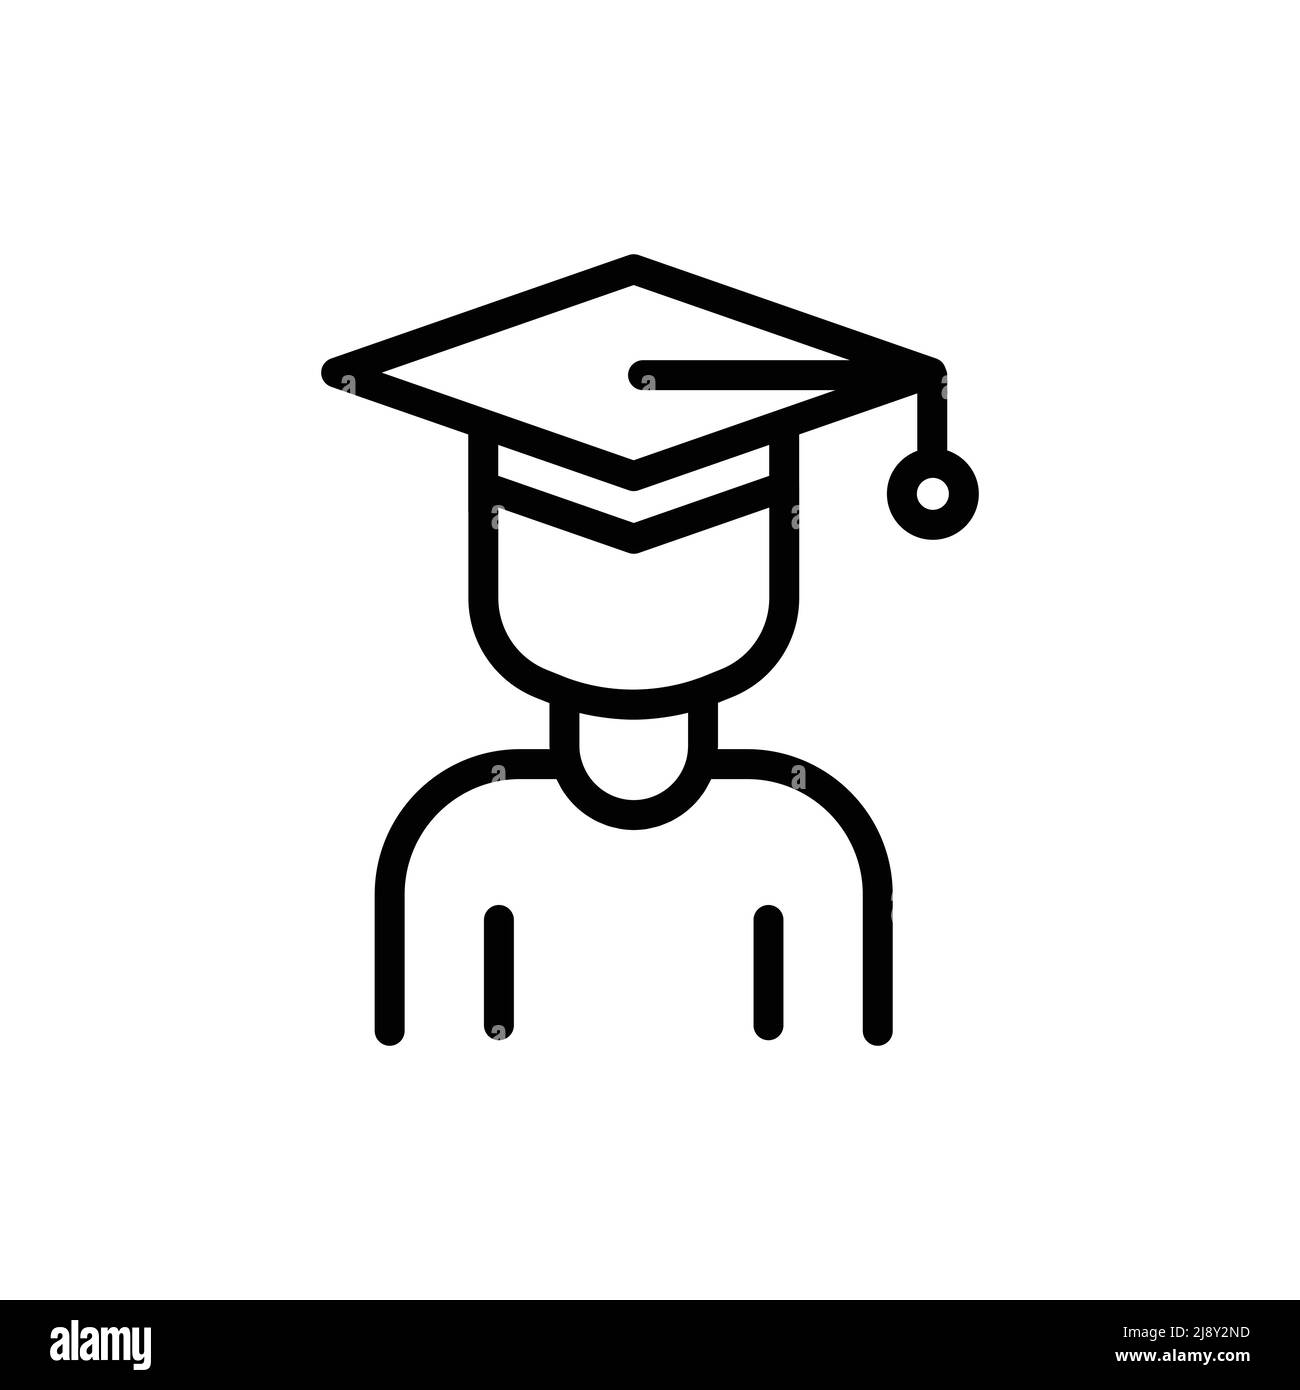 Student icon vector. Education. Line icon style. Simple design illustration editable Stock Vector